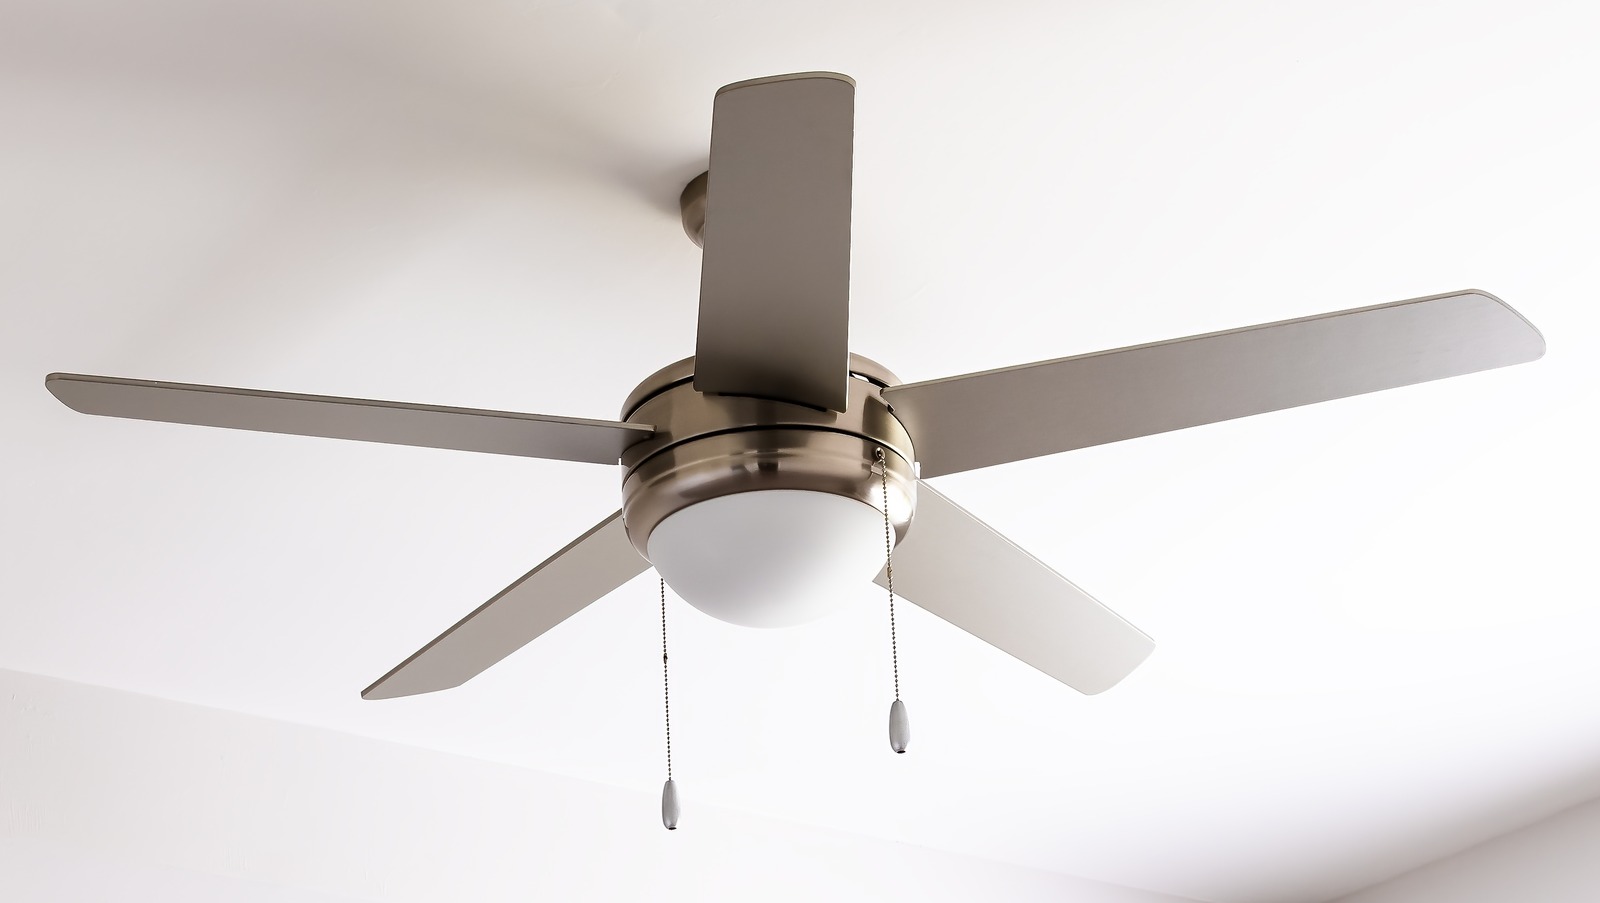 What further measures can you take to guarantee that ceiling fans are used safely?